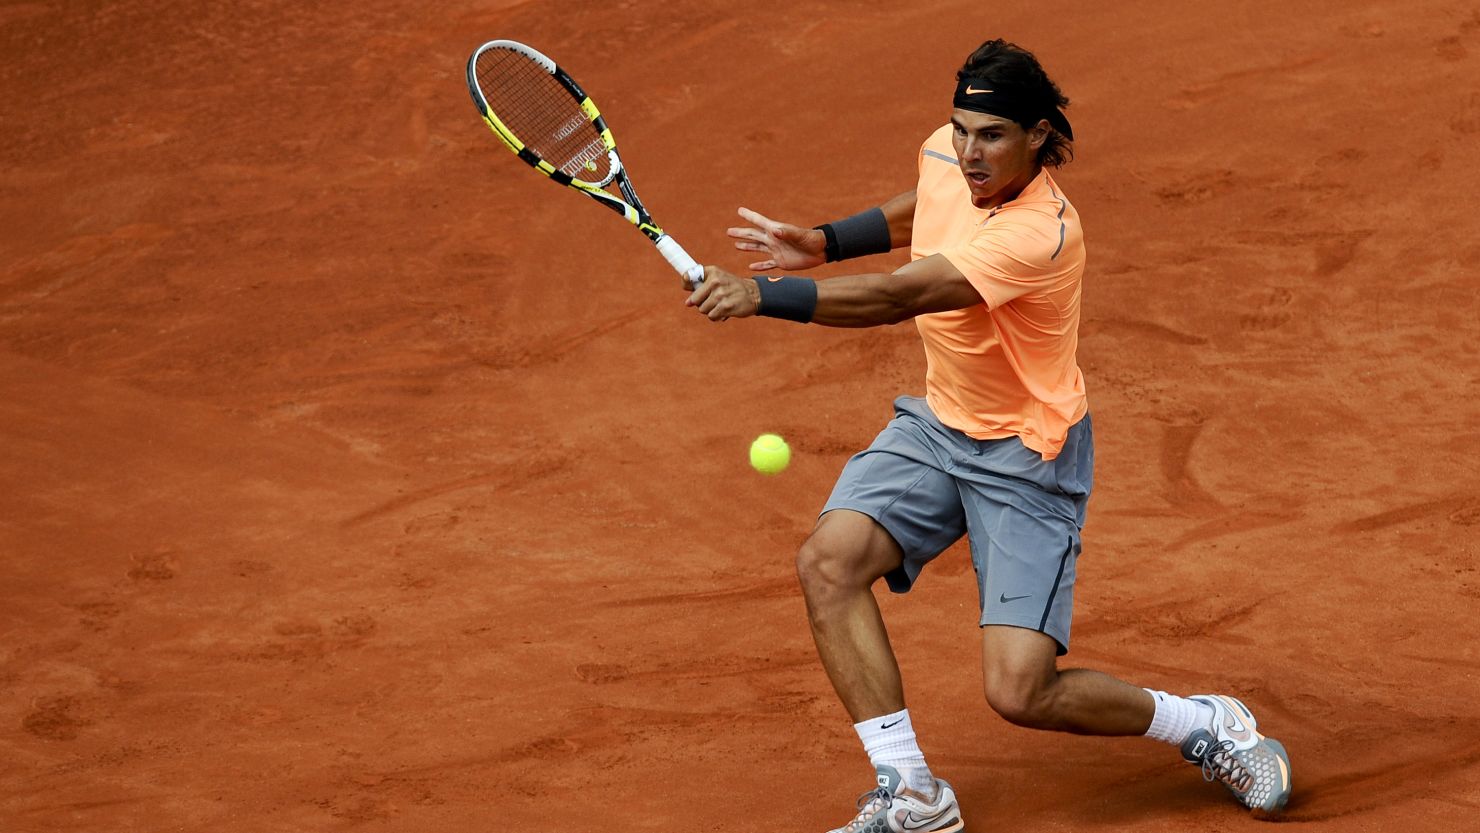 Rafael Nadal stormed into the second round of the Barcelona Open